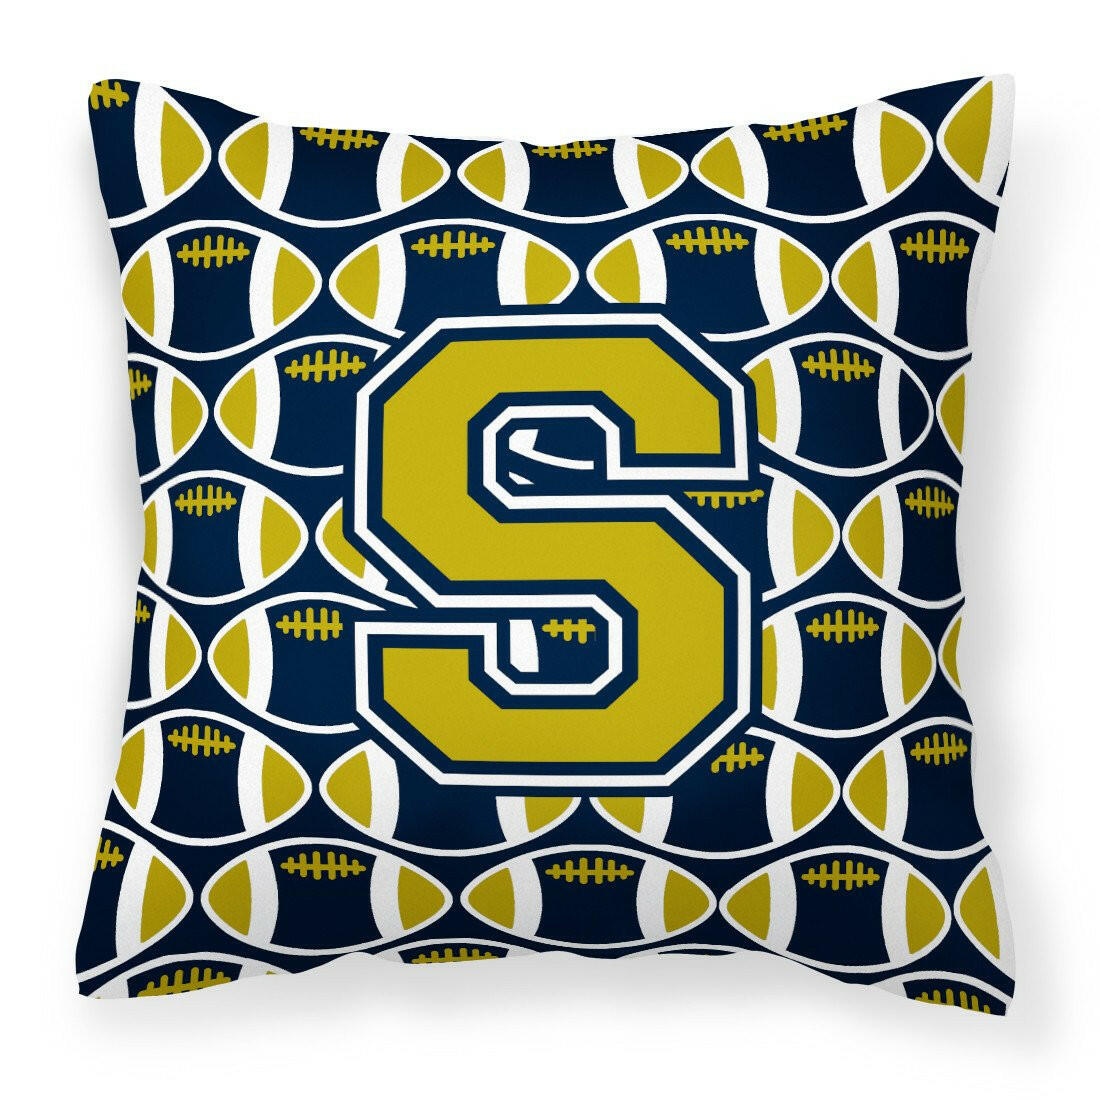 Letter S Football Blue and Gold Fabric Decorative Pillow CJ1074-SPW1414 by Caroline's Treasures